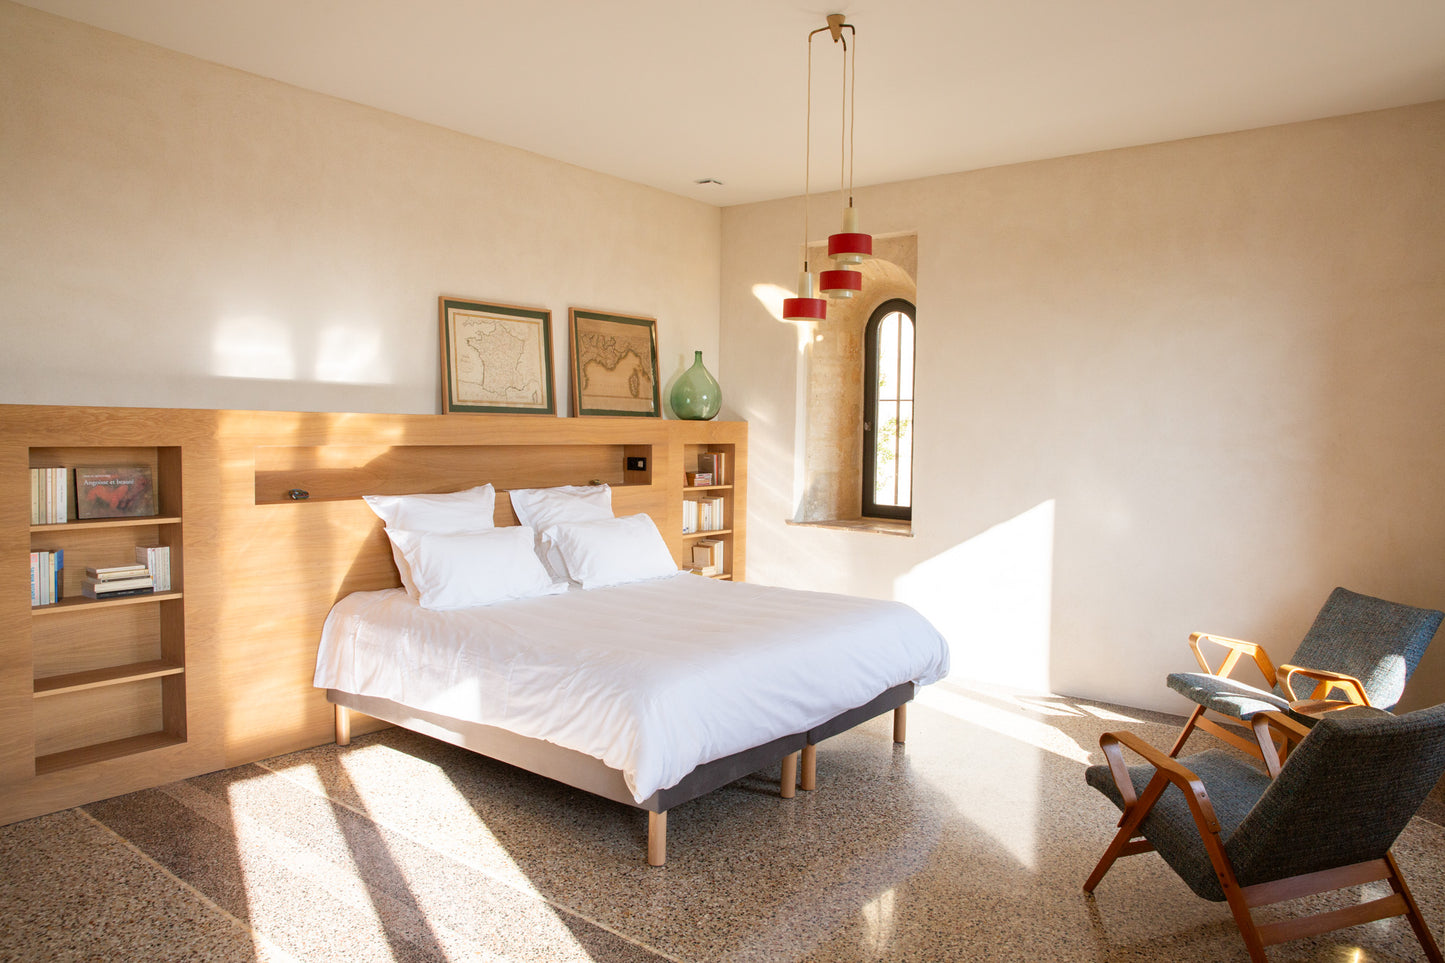 PREMIUM FAMILY SUITE WITH 2 BEDROOMS GARDEN VIEW: CLOISTER N°3